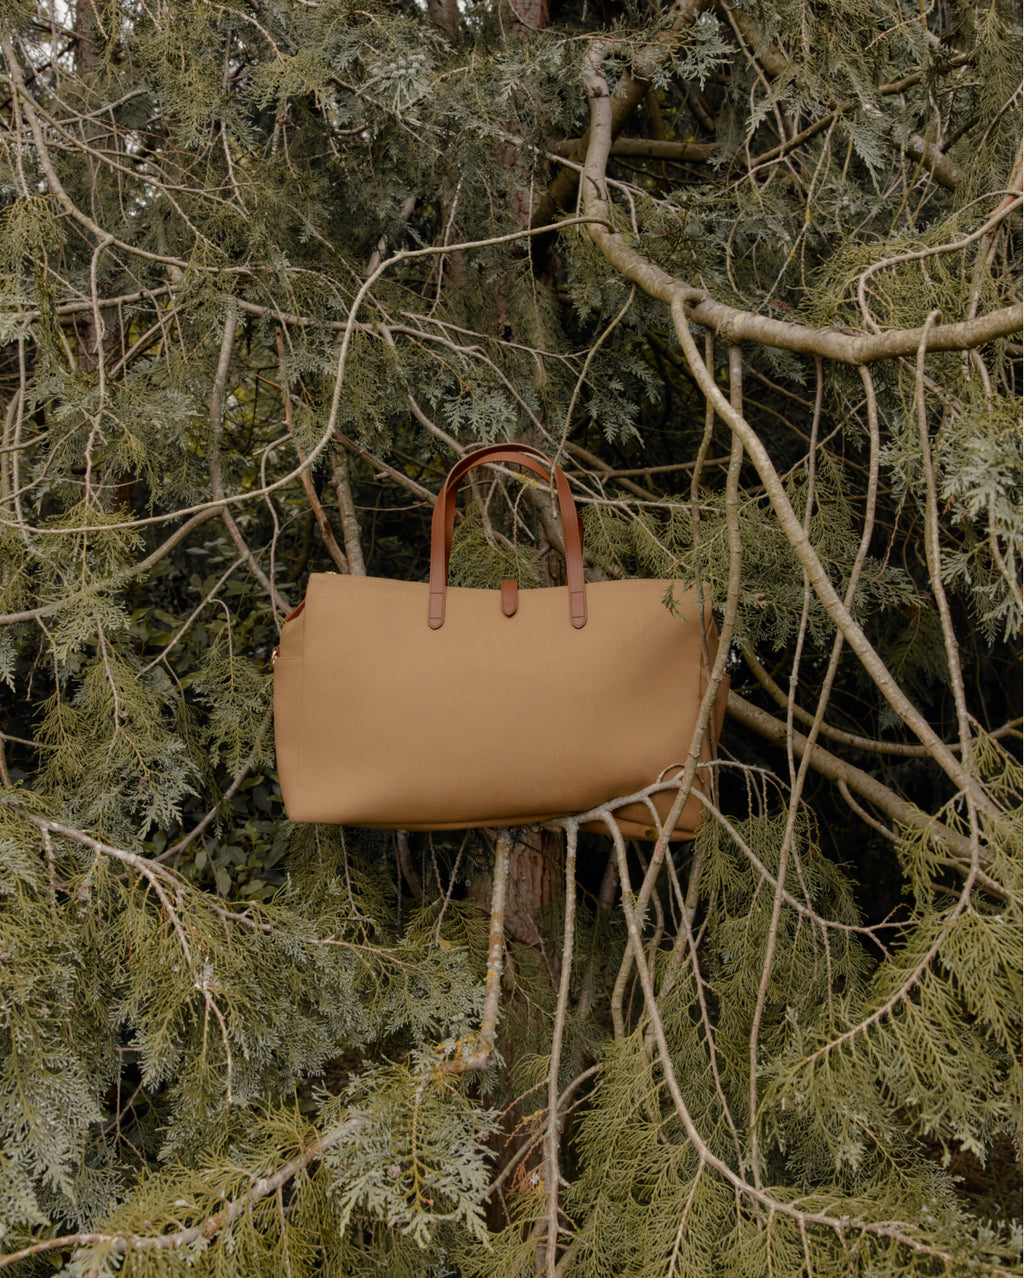 Handbag hanging on a tree branch in a coniferous forest.